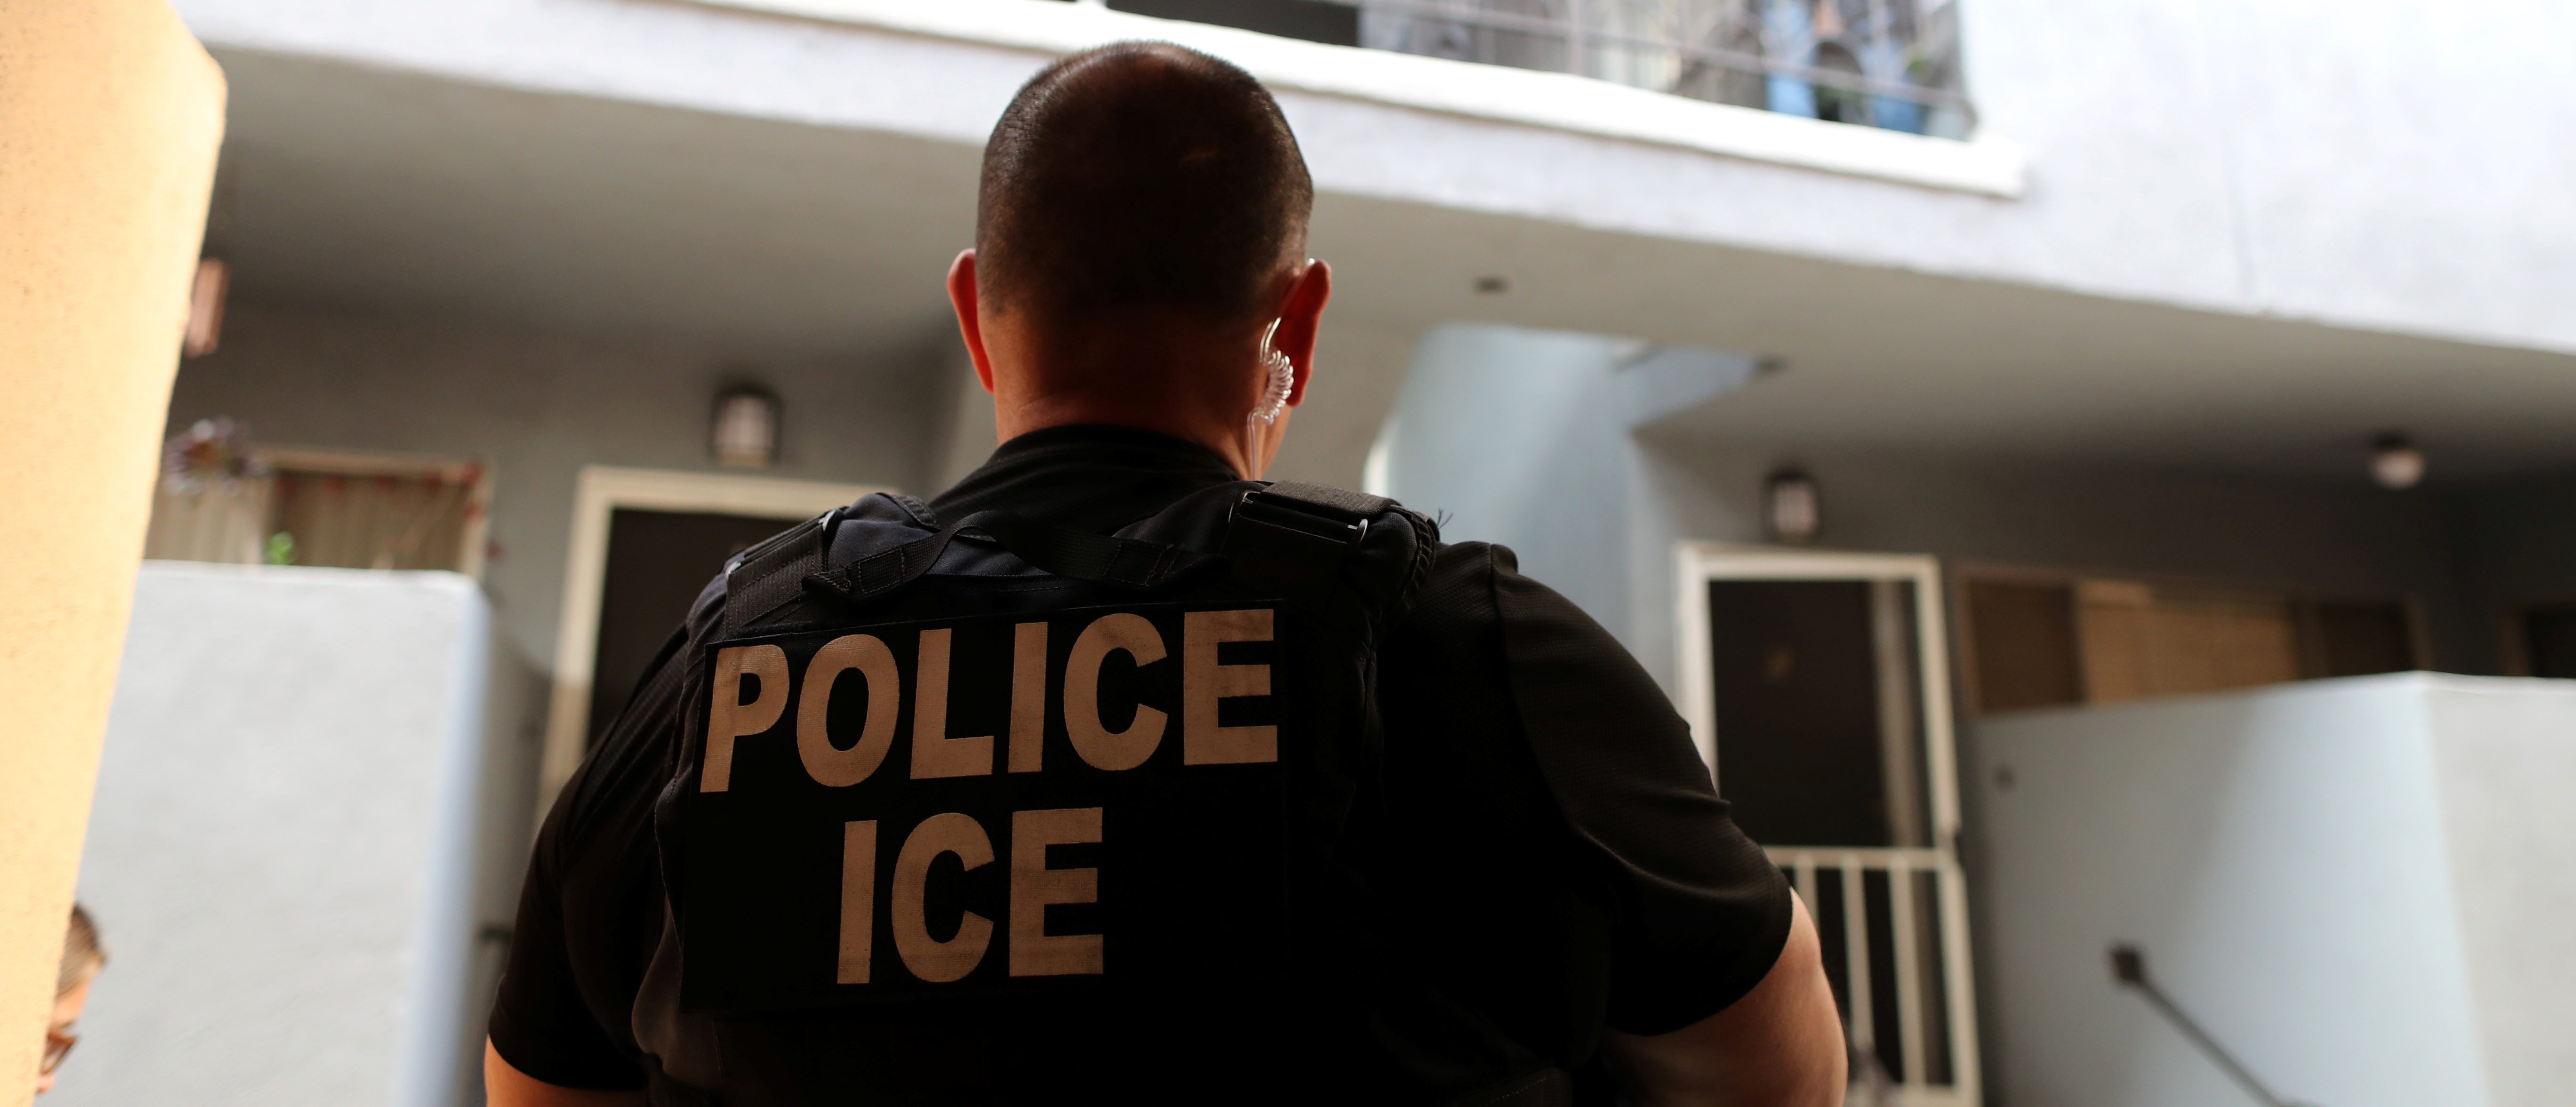 ICE Field Office Director, Enforcement and Removal Operations, David Marin and U.S. Immigration and Customs Enforcement's (ICE) Fugitive Operations team search for a Mexican national at a home in Hawthorne